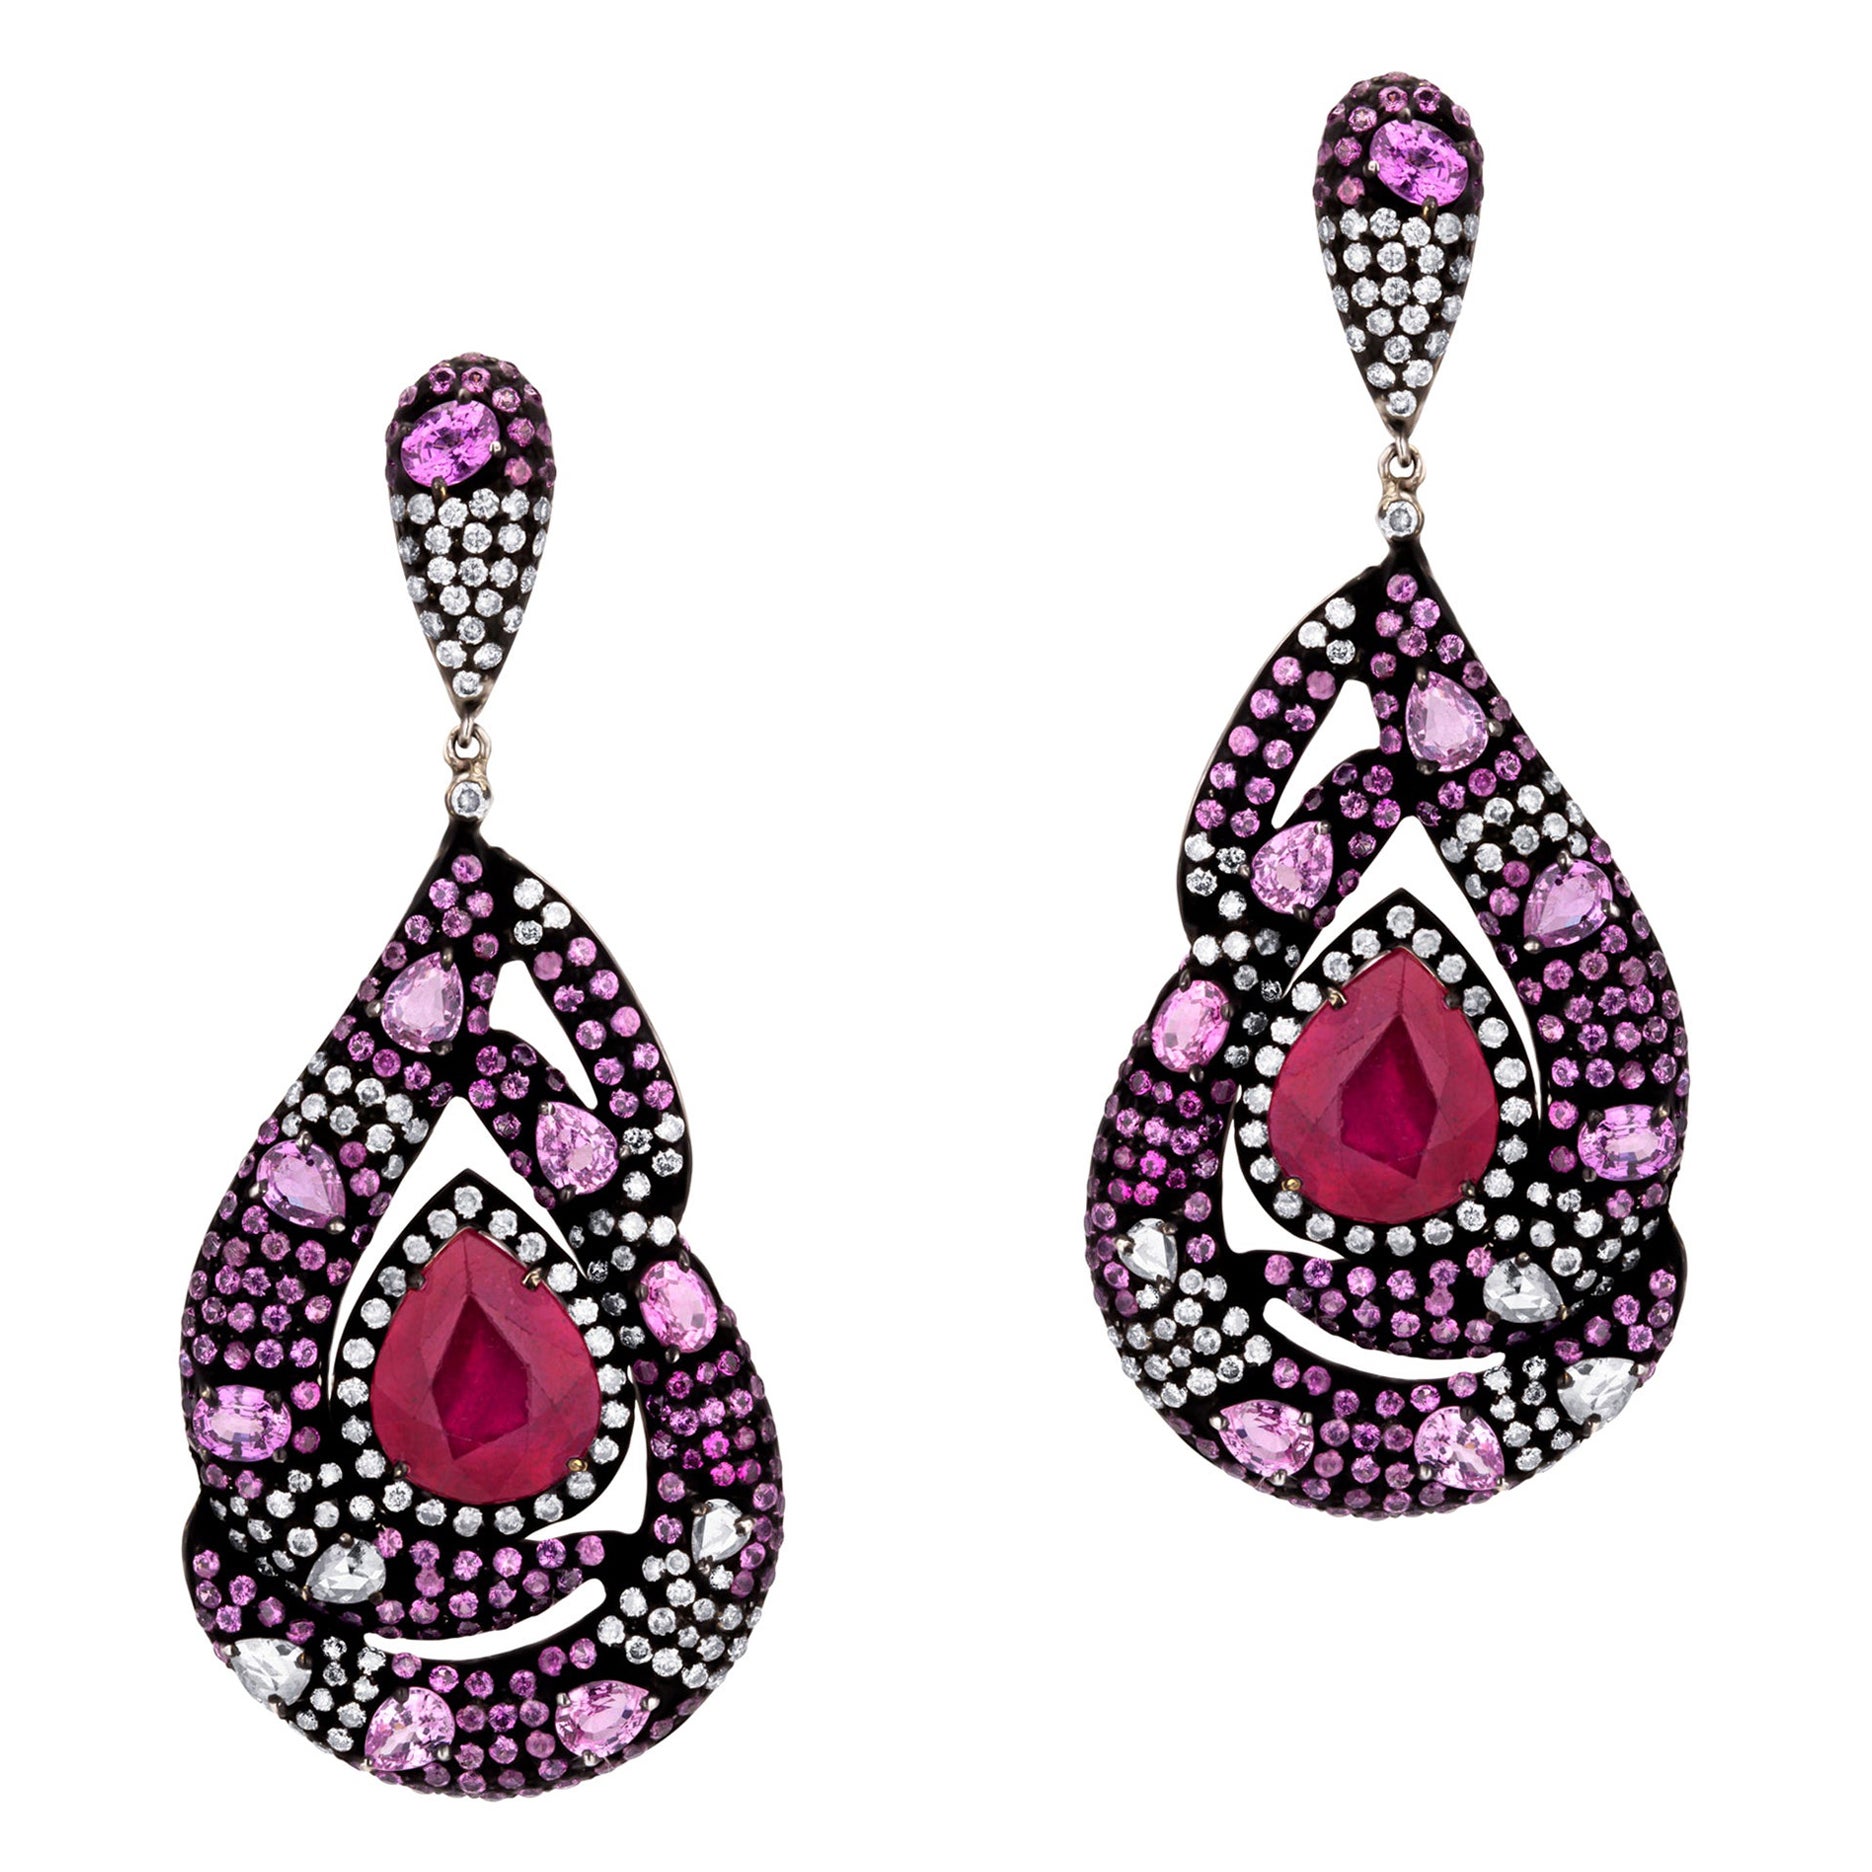 18.31cttw. Victorian Ruby and Pink Sapphire Dangle Earrings with Diamonds